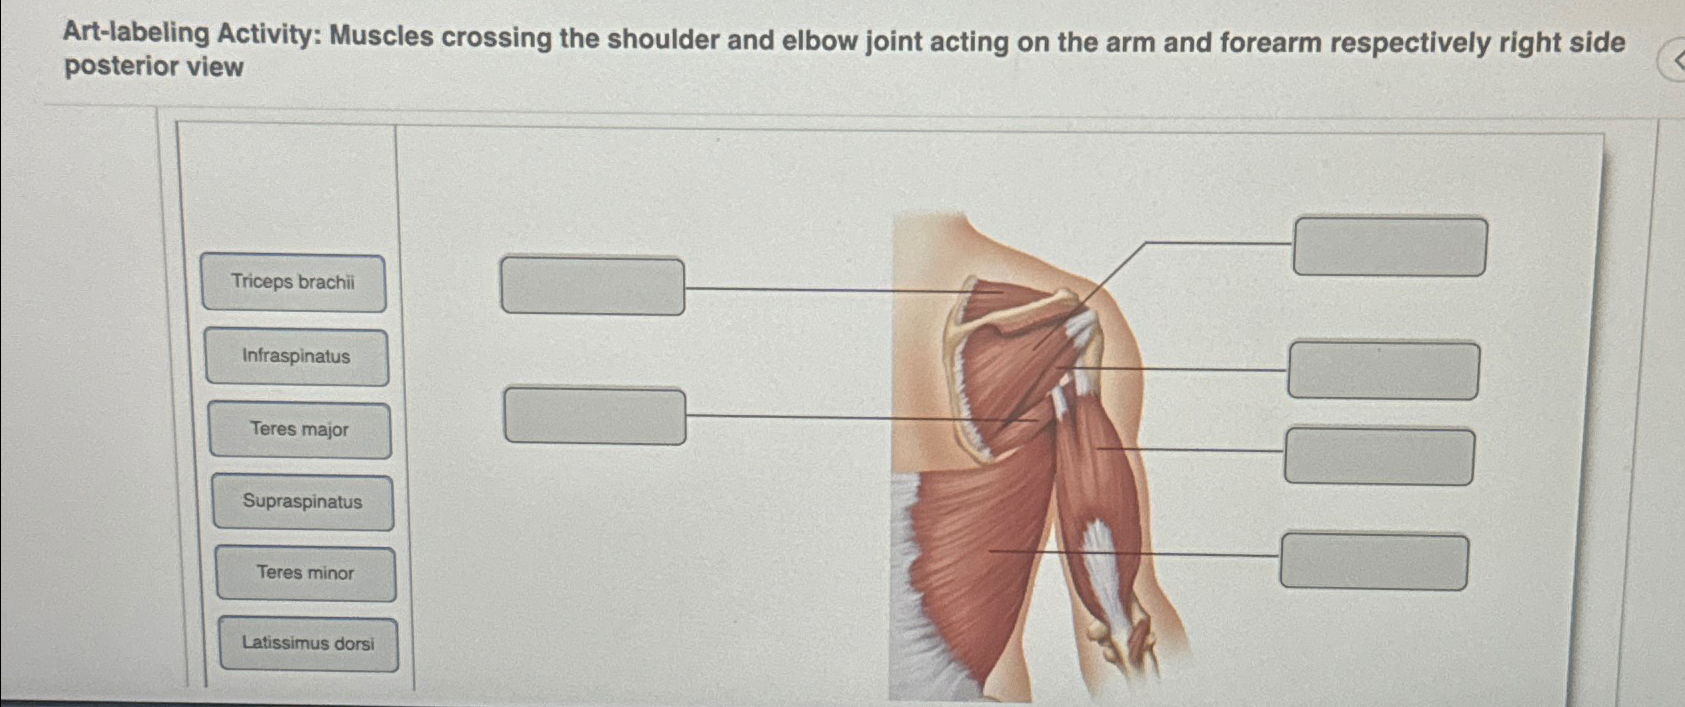 Art-labeling Activity: Muscles crossing the shoulder